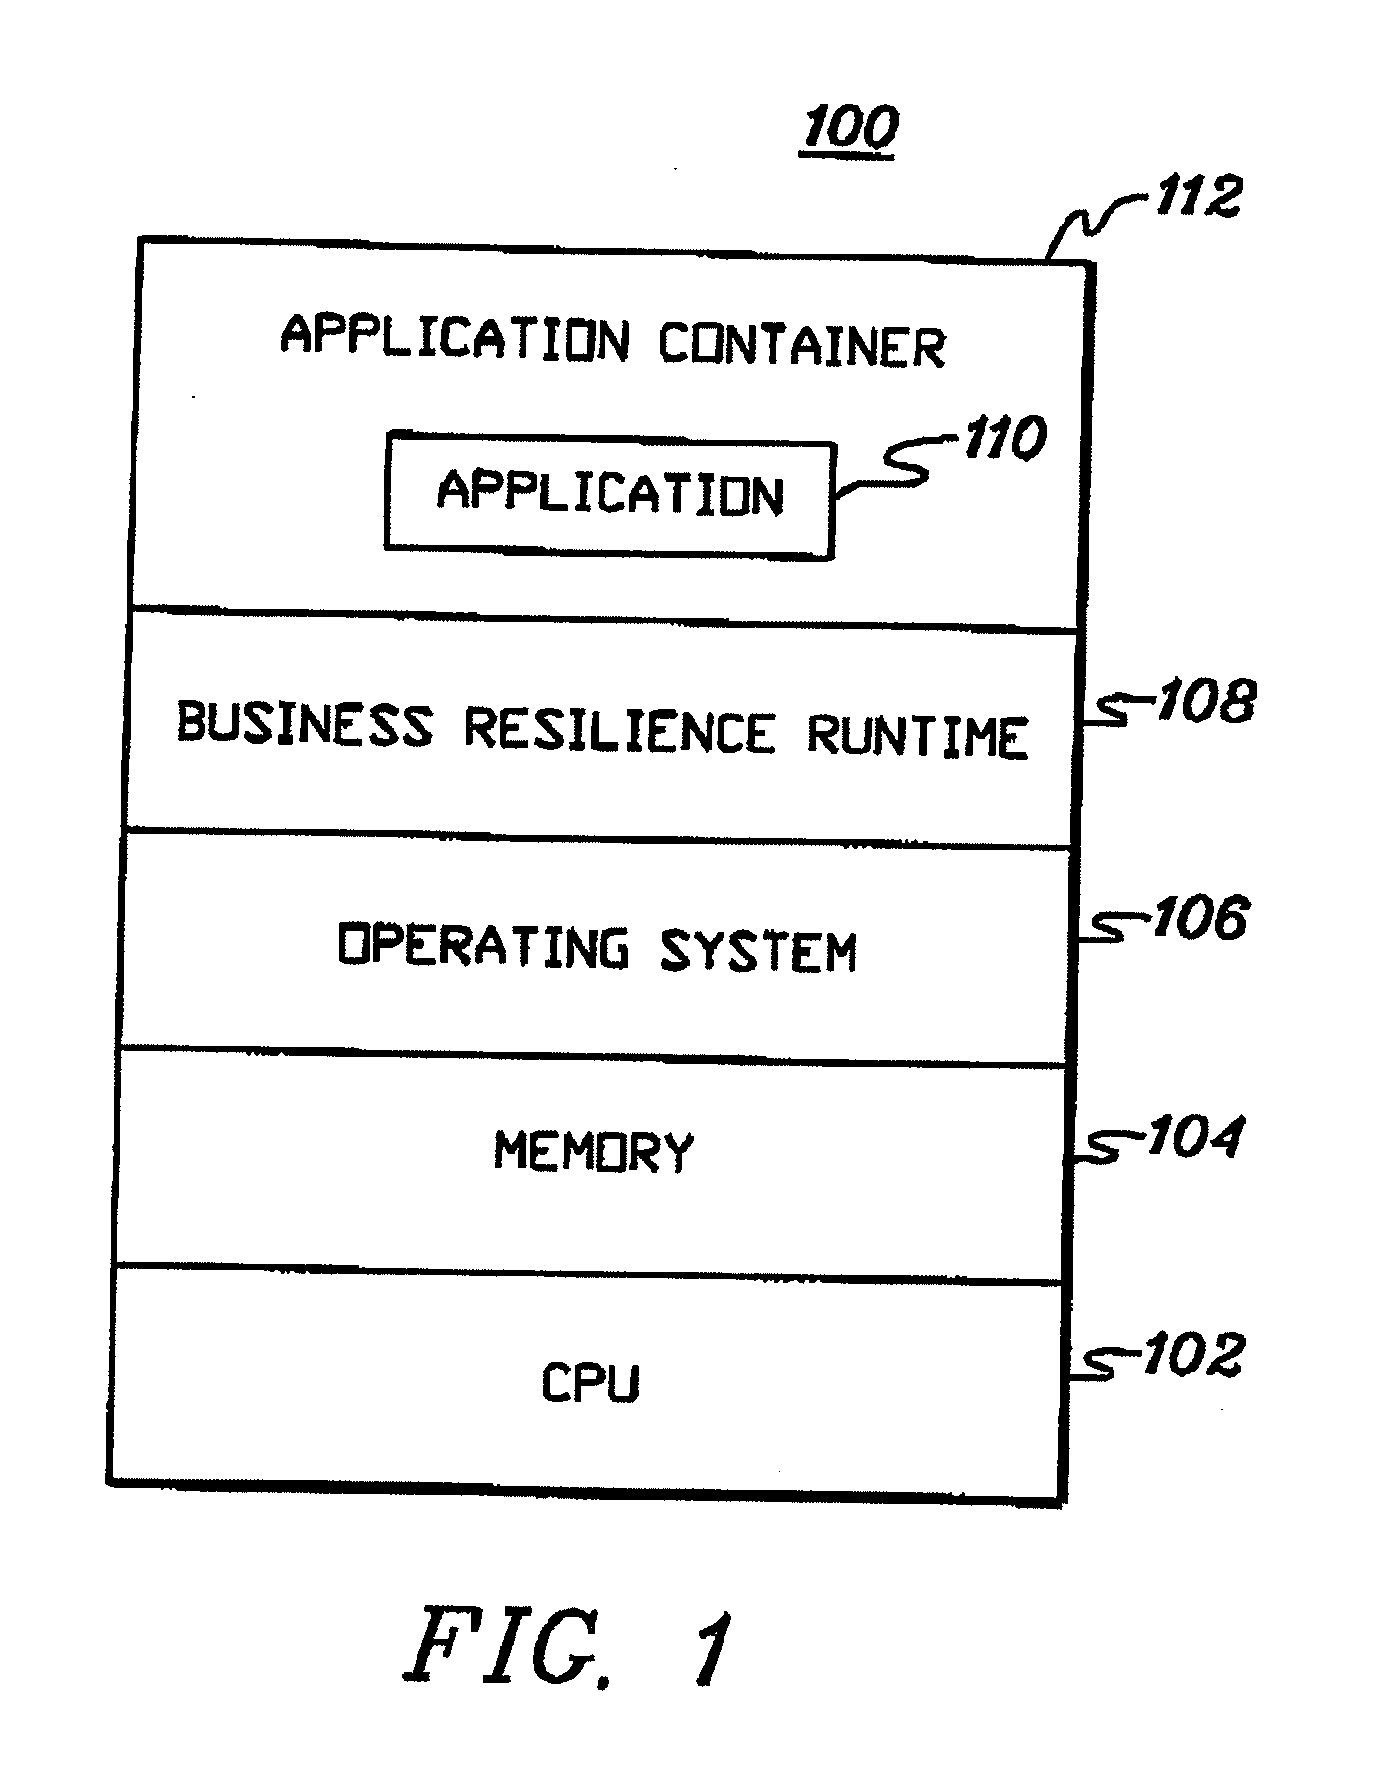 Computer pattern system environment supporting business resiliency